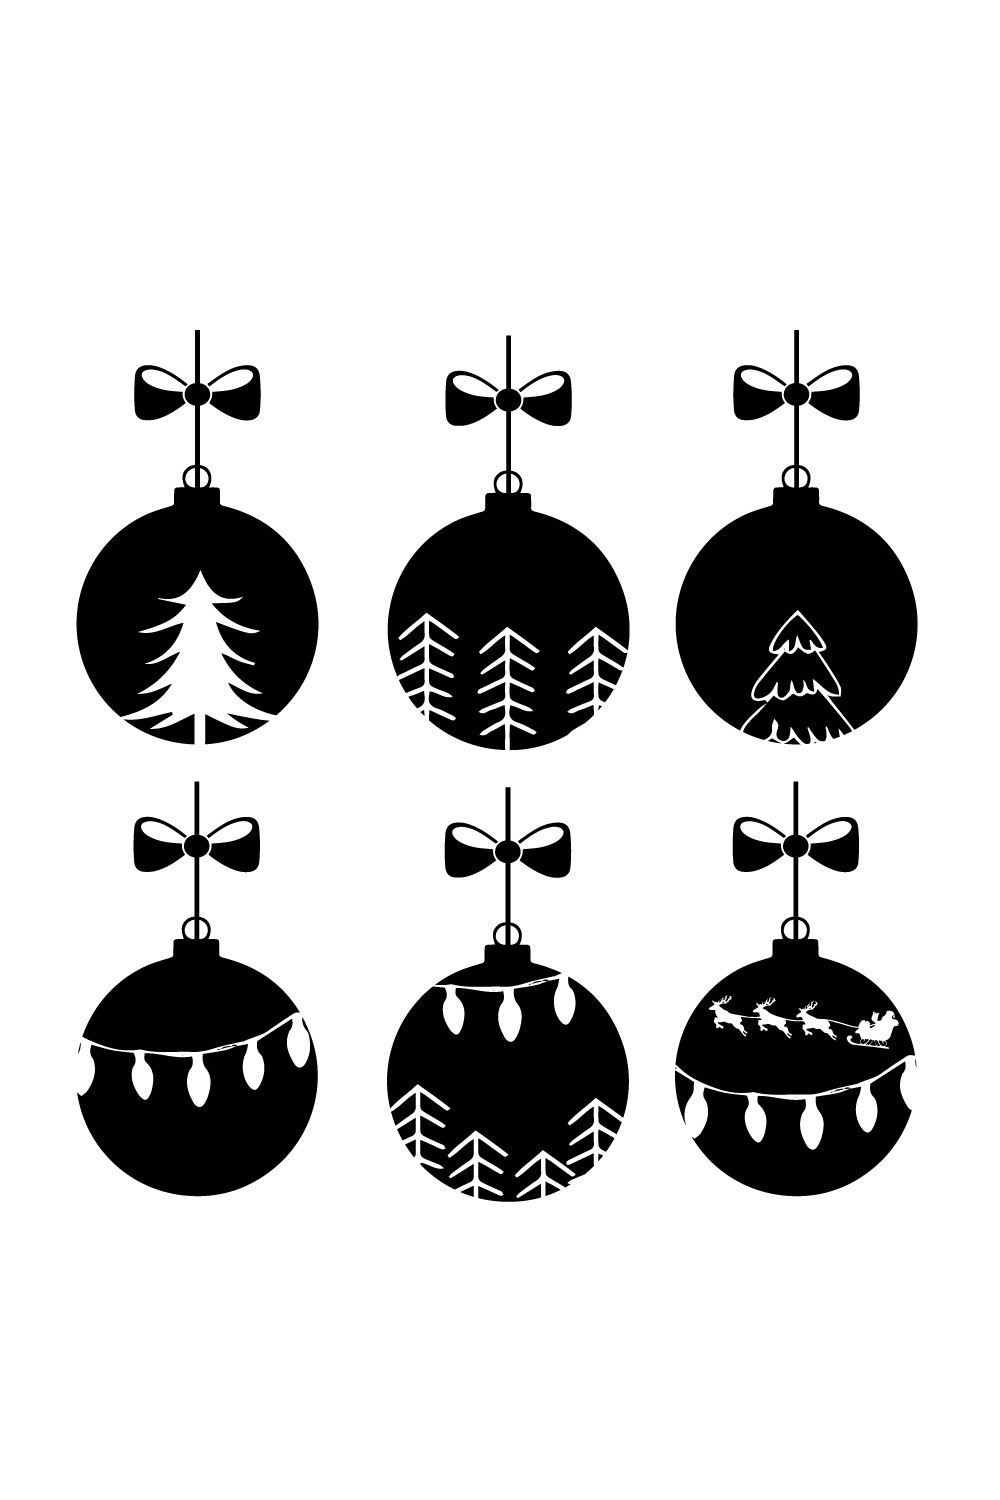 Collection of black beautiful images of Christmas tree decorations in the form of a ball